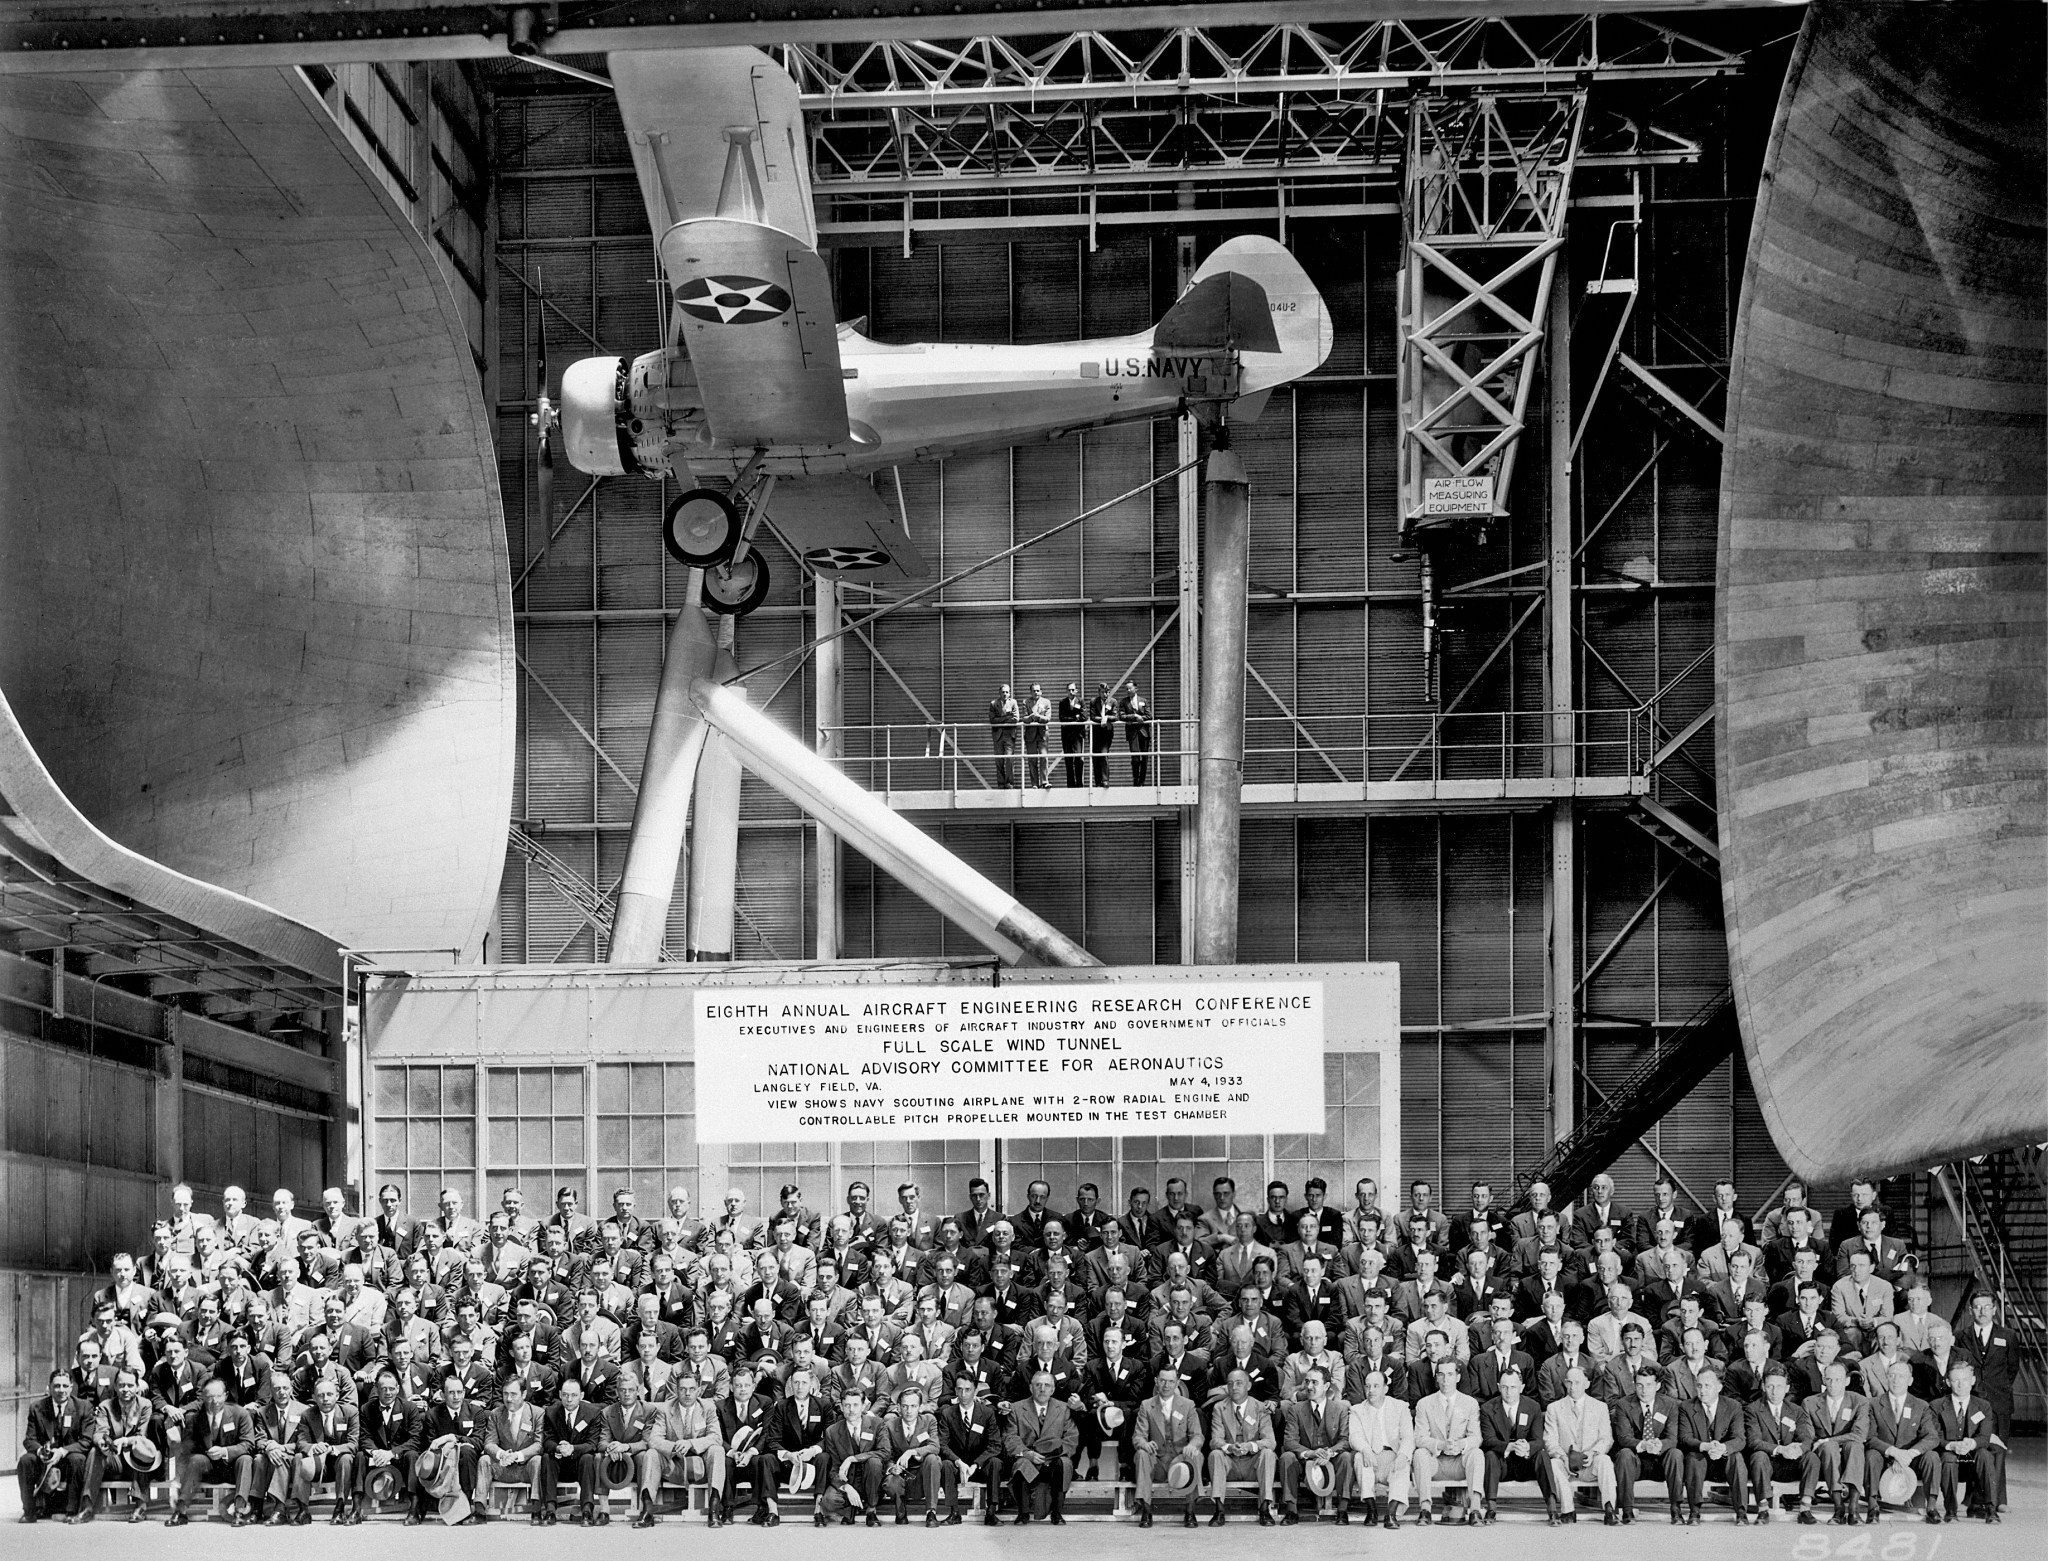 This is a photo of a large group of people, attendees at the 8th Annual Aircraft Engineering Research Conference, sitting in bleachers in the Full-Scale Tunnel. A U.S. Navy scouting aircraft hangs from the ceiling above the attendees.